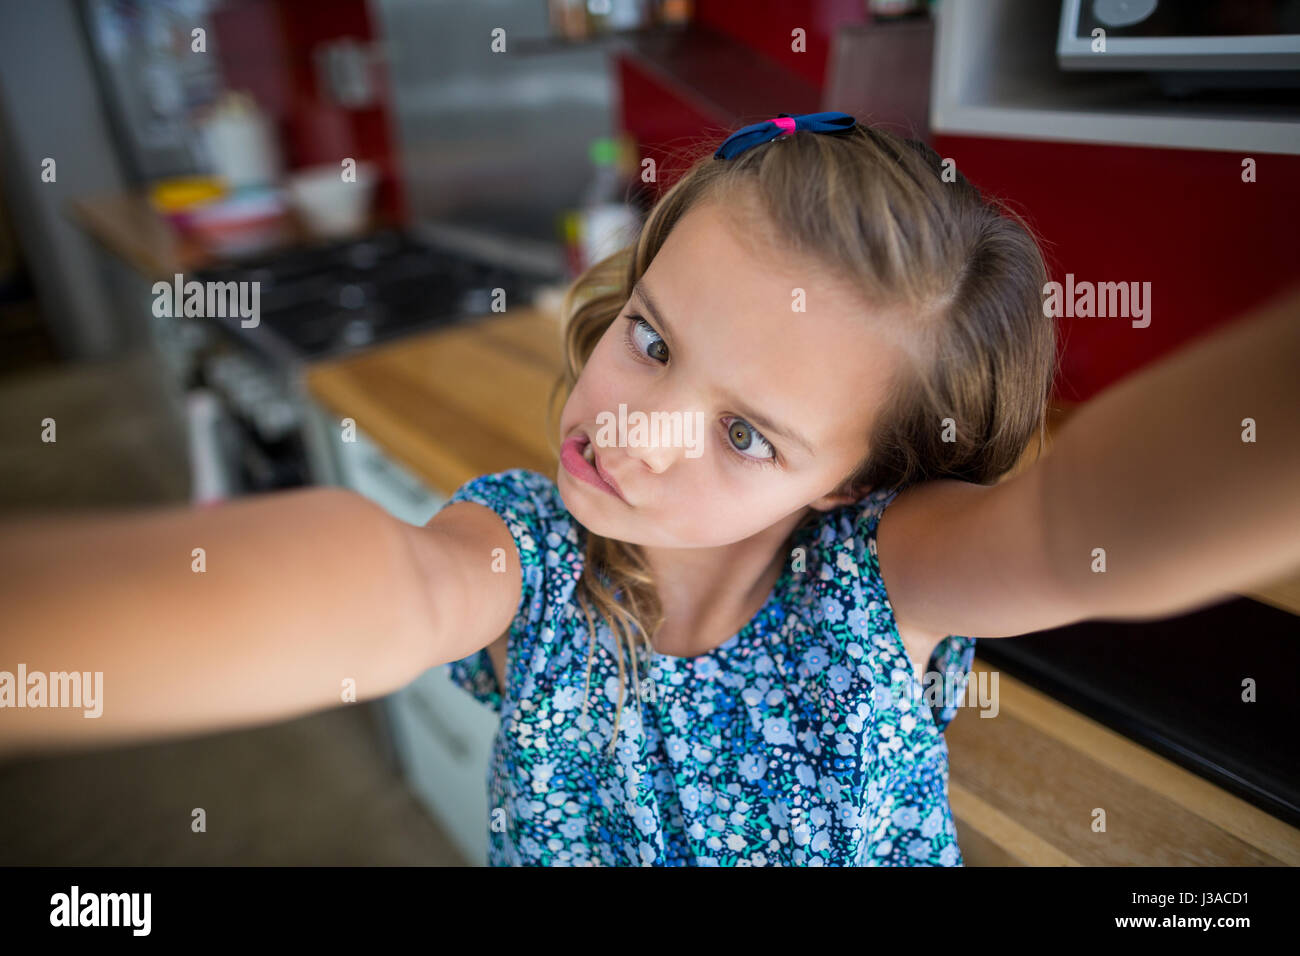 Girl pulling funny faces in kitchen at home Stock Photo